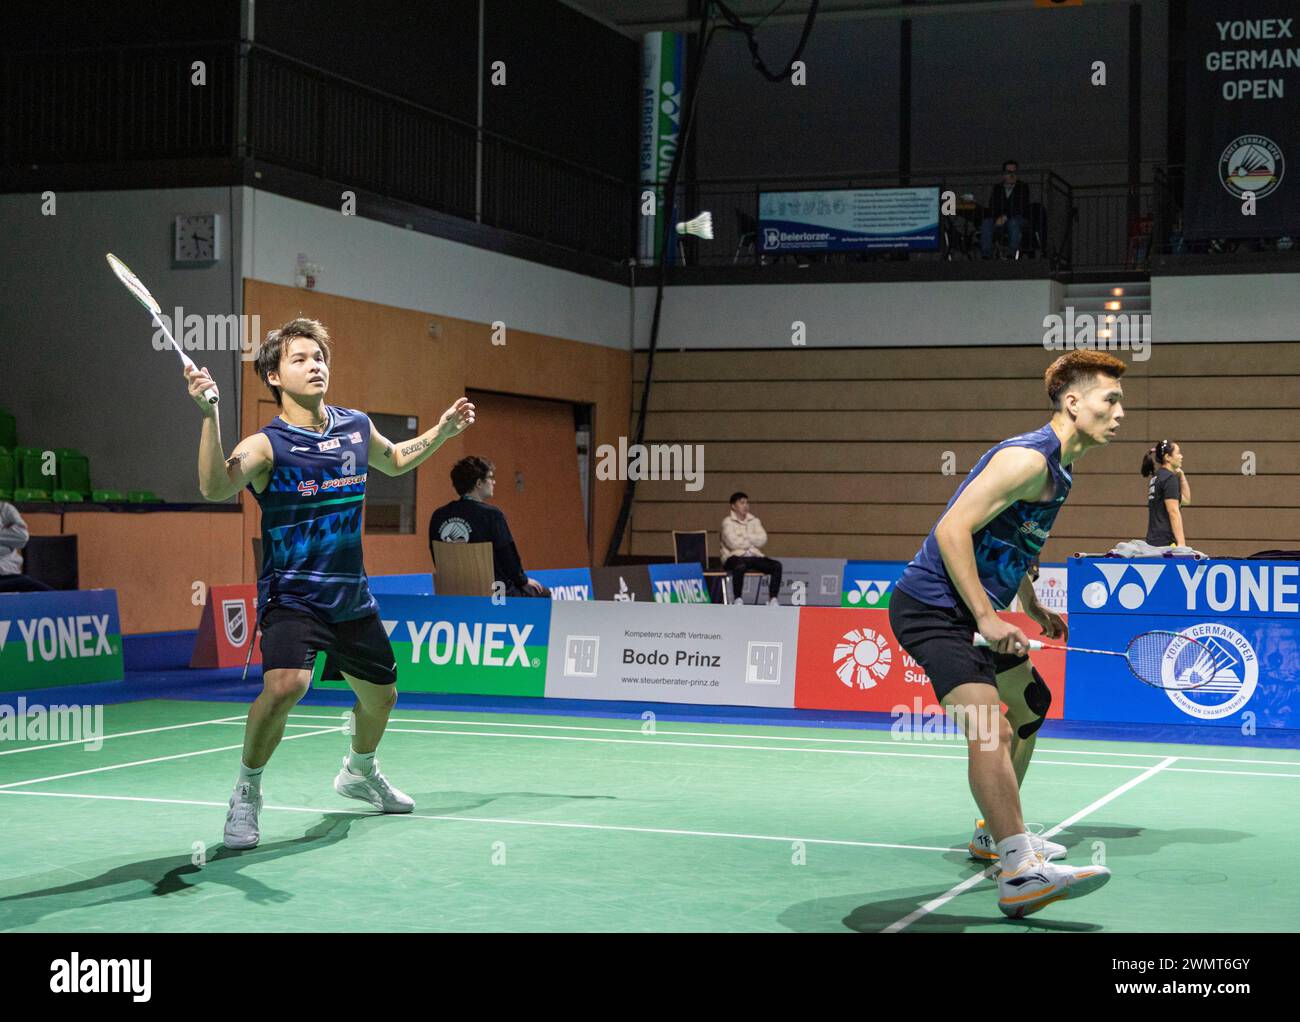 Muelheim, Germany. 27th Feb, 2024. Ong Yew Sin/Teo Ee Yi (L) of Malaysia compete during the men's doubles first round match between Ong Yew Sin/Teo Ee Yi of Malaysia and Eloi Adam/Leo Rossi of France at Yonex German Open 2024 badminton tournament in Muelheim, Germany, Feb. 27, 2024. Credit: Zhang Fan/Xinhua/Alamy Live News Stock Photo